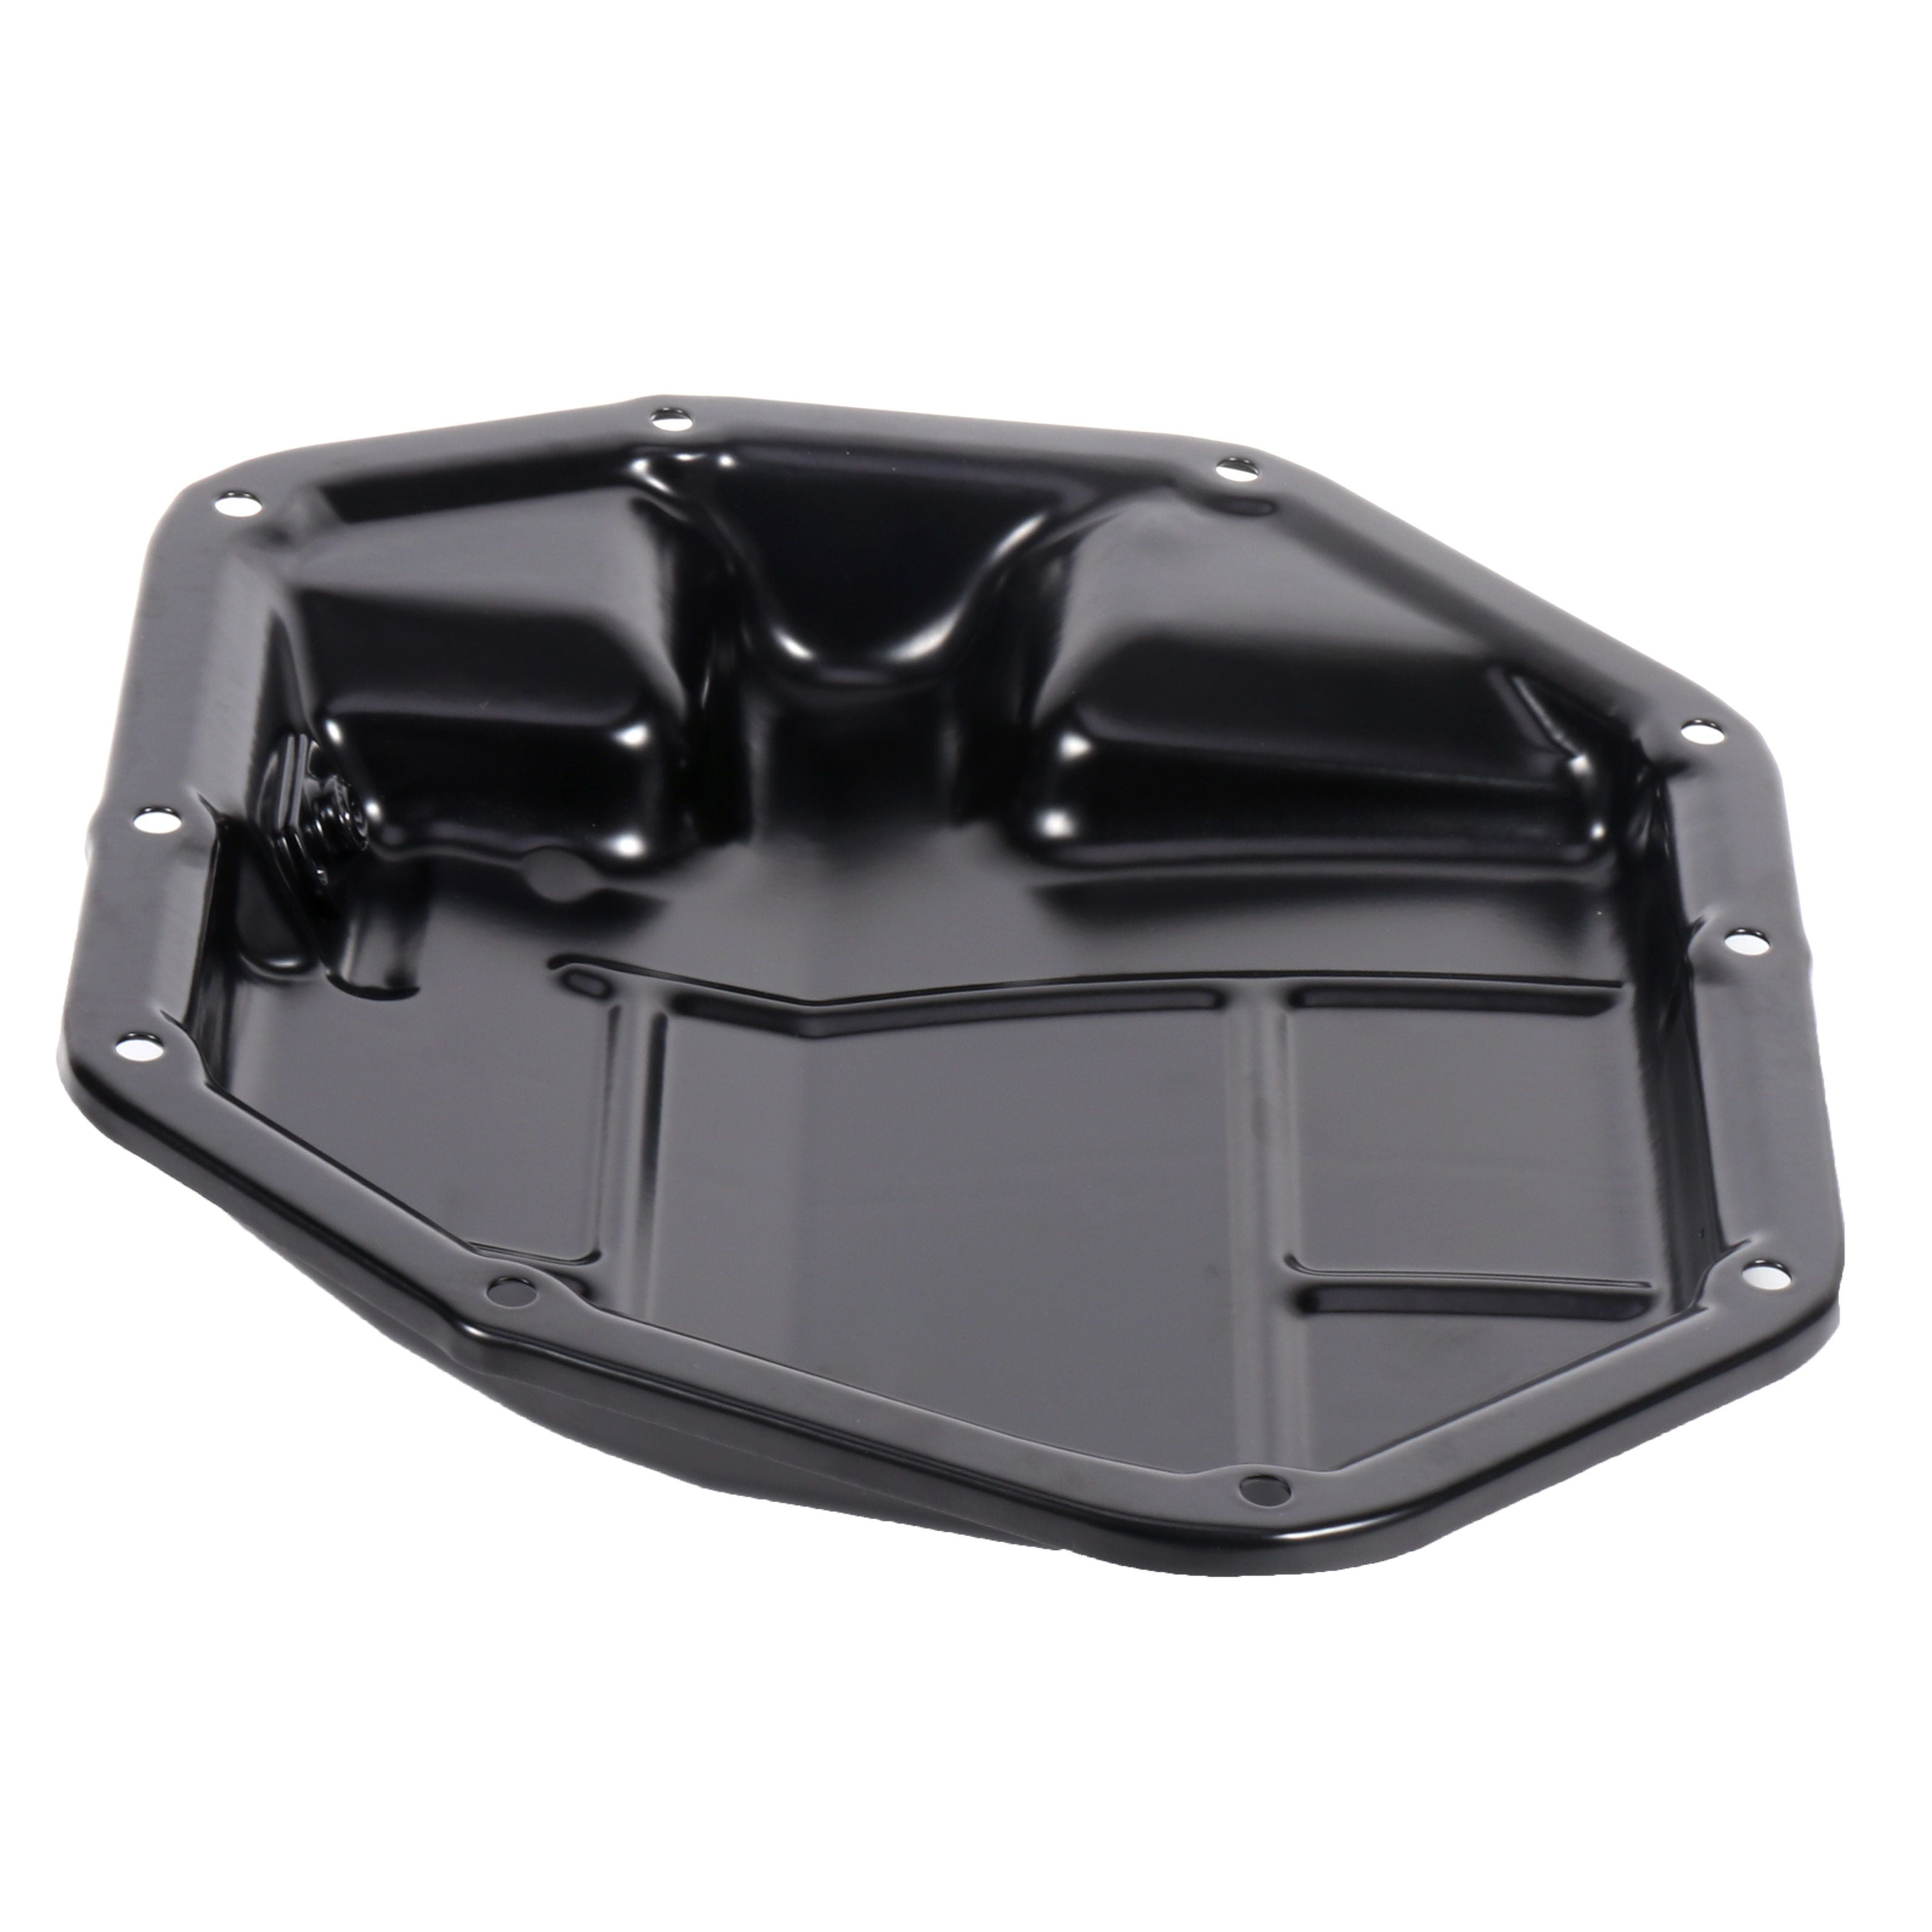 Engine Oil Pan For 2007-2012 FOR NISSAN FOR TIIDA 1.8L SENTRA CUBE 264-507